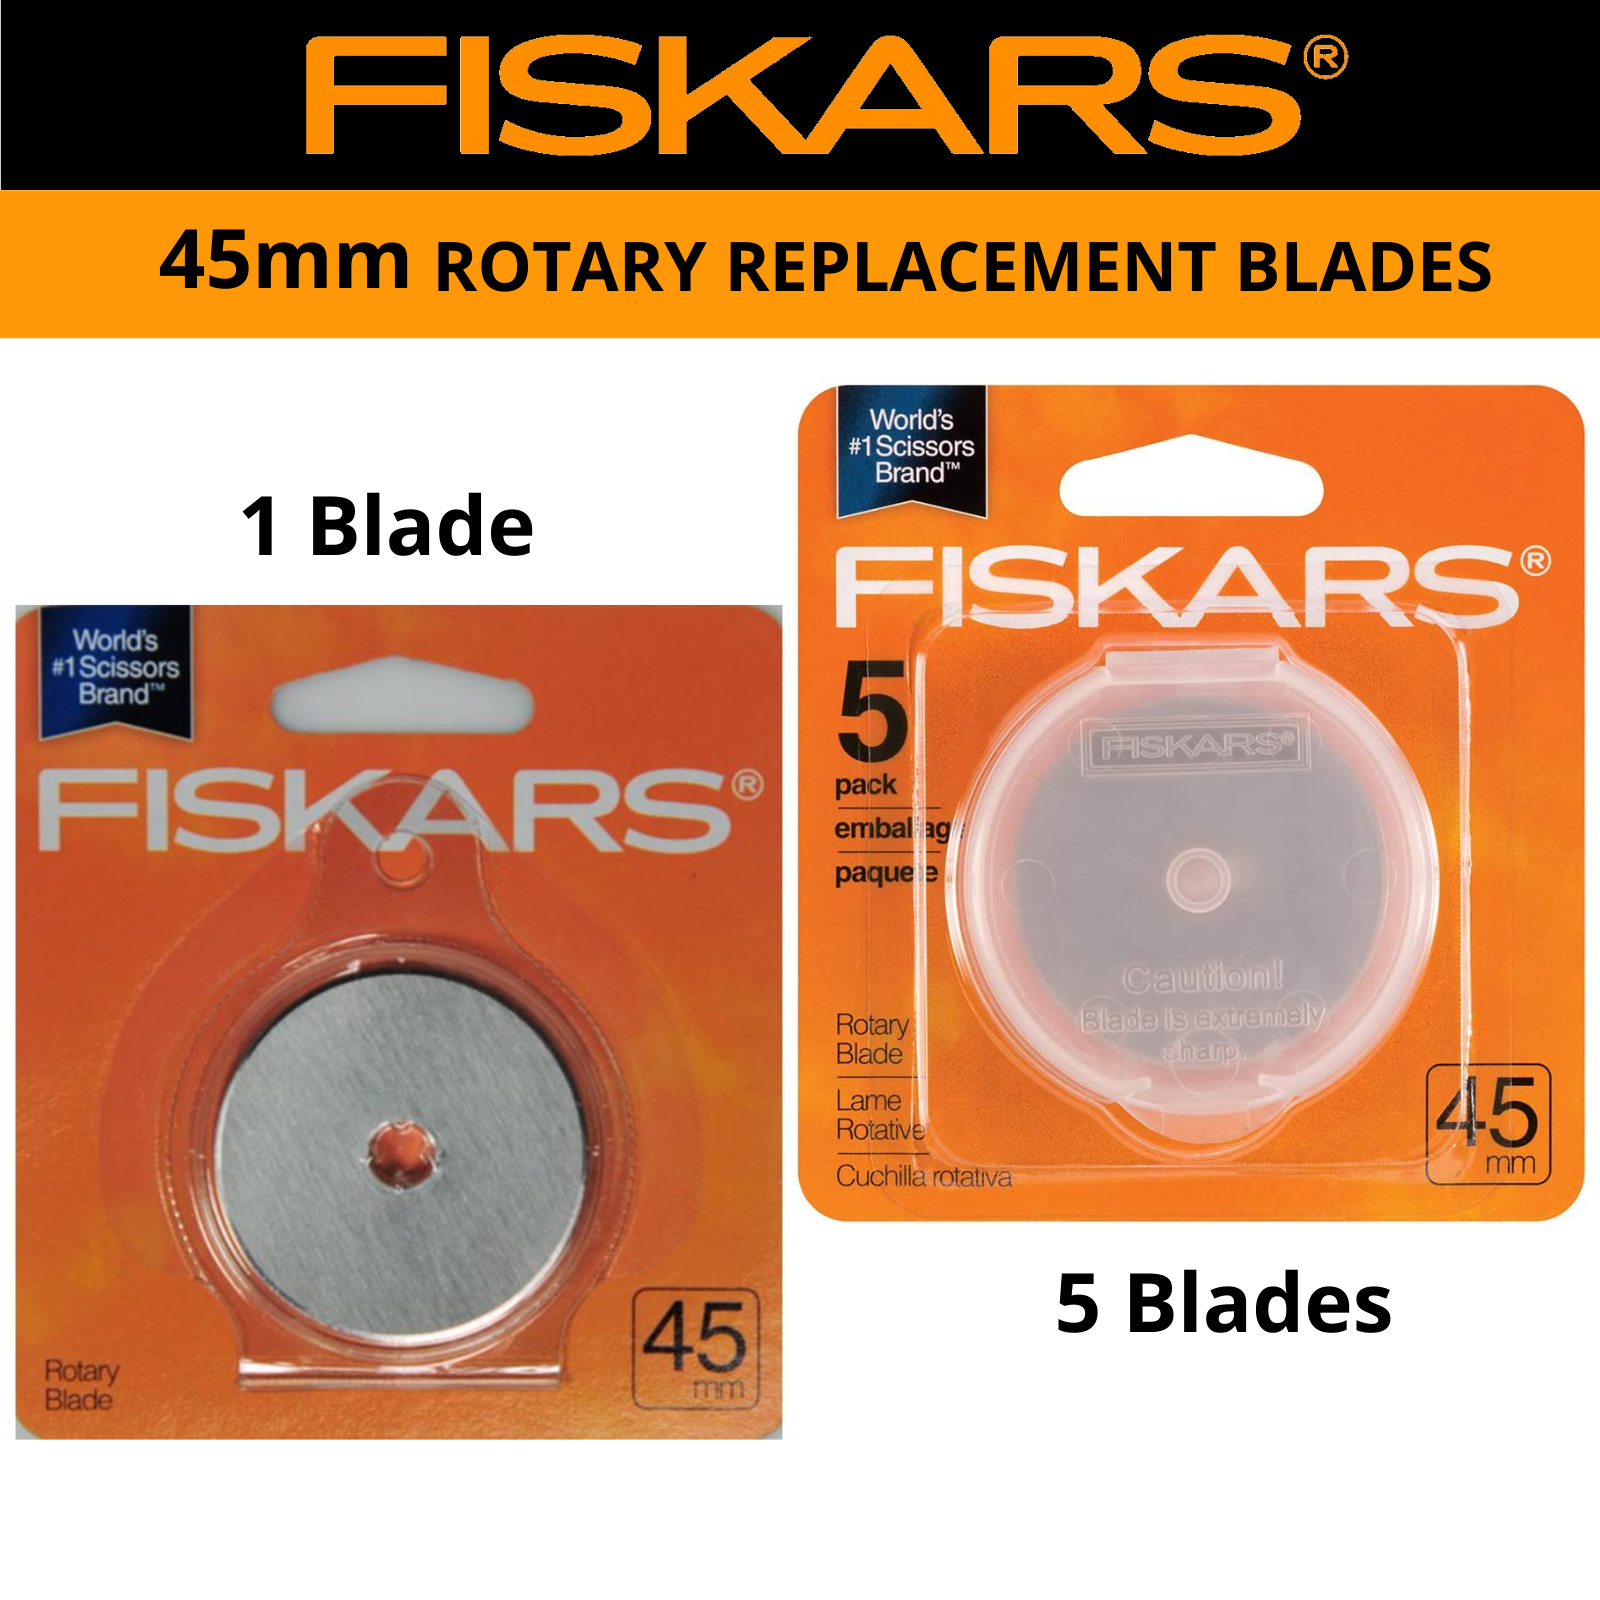 Fiskars 45mm Rotary Replacement Blades, Stainless Steel Blades